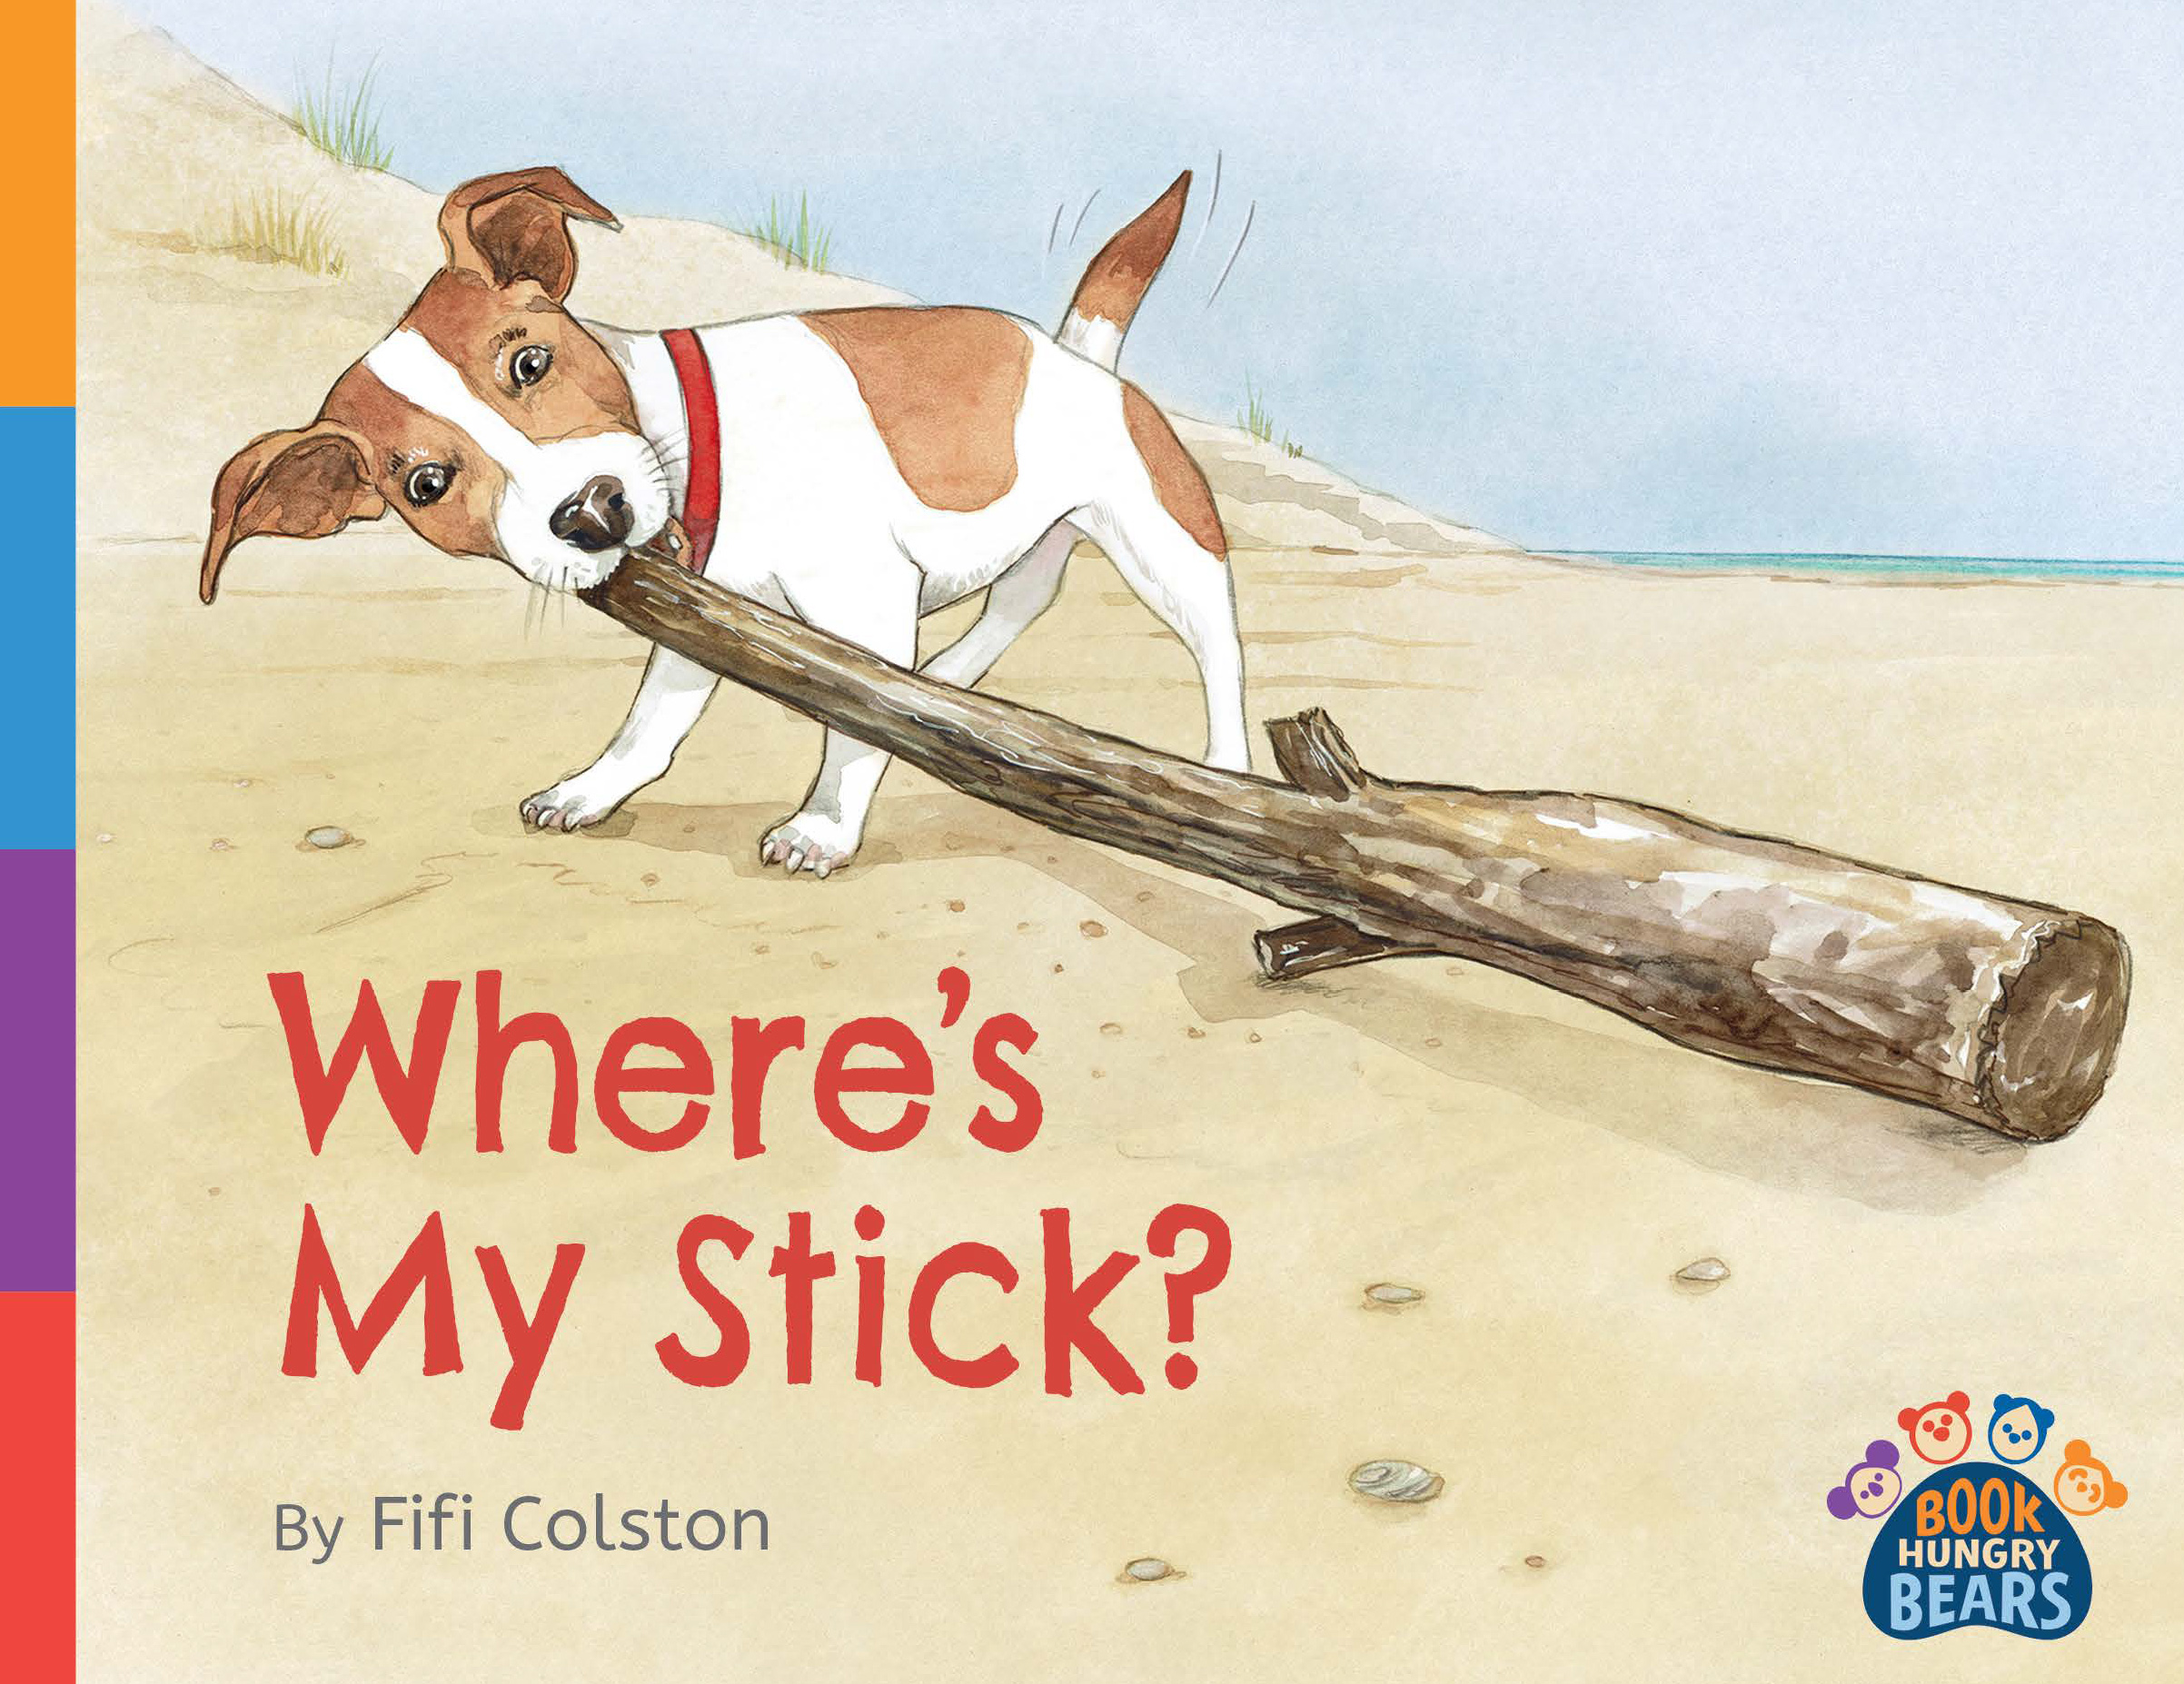 Where My Stick: Image of the cover of the book “Where’s my stick”.